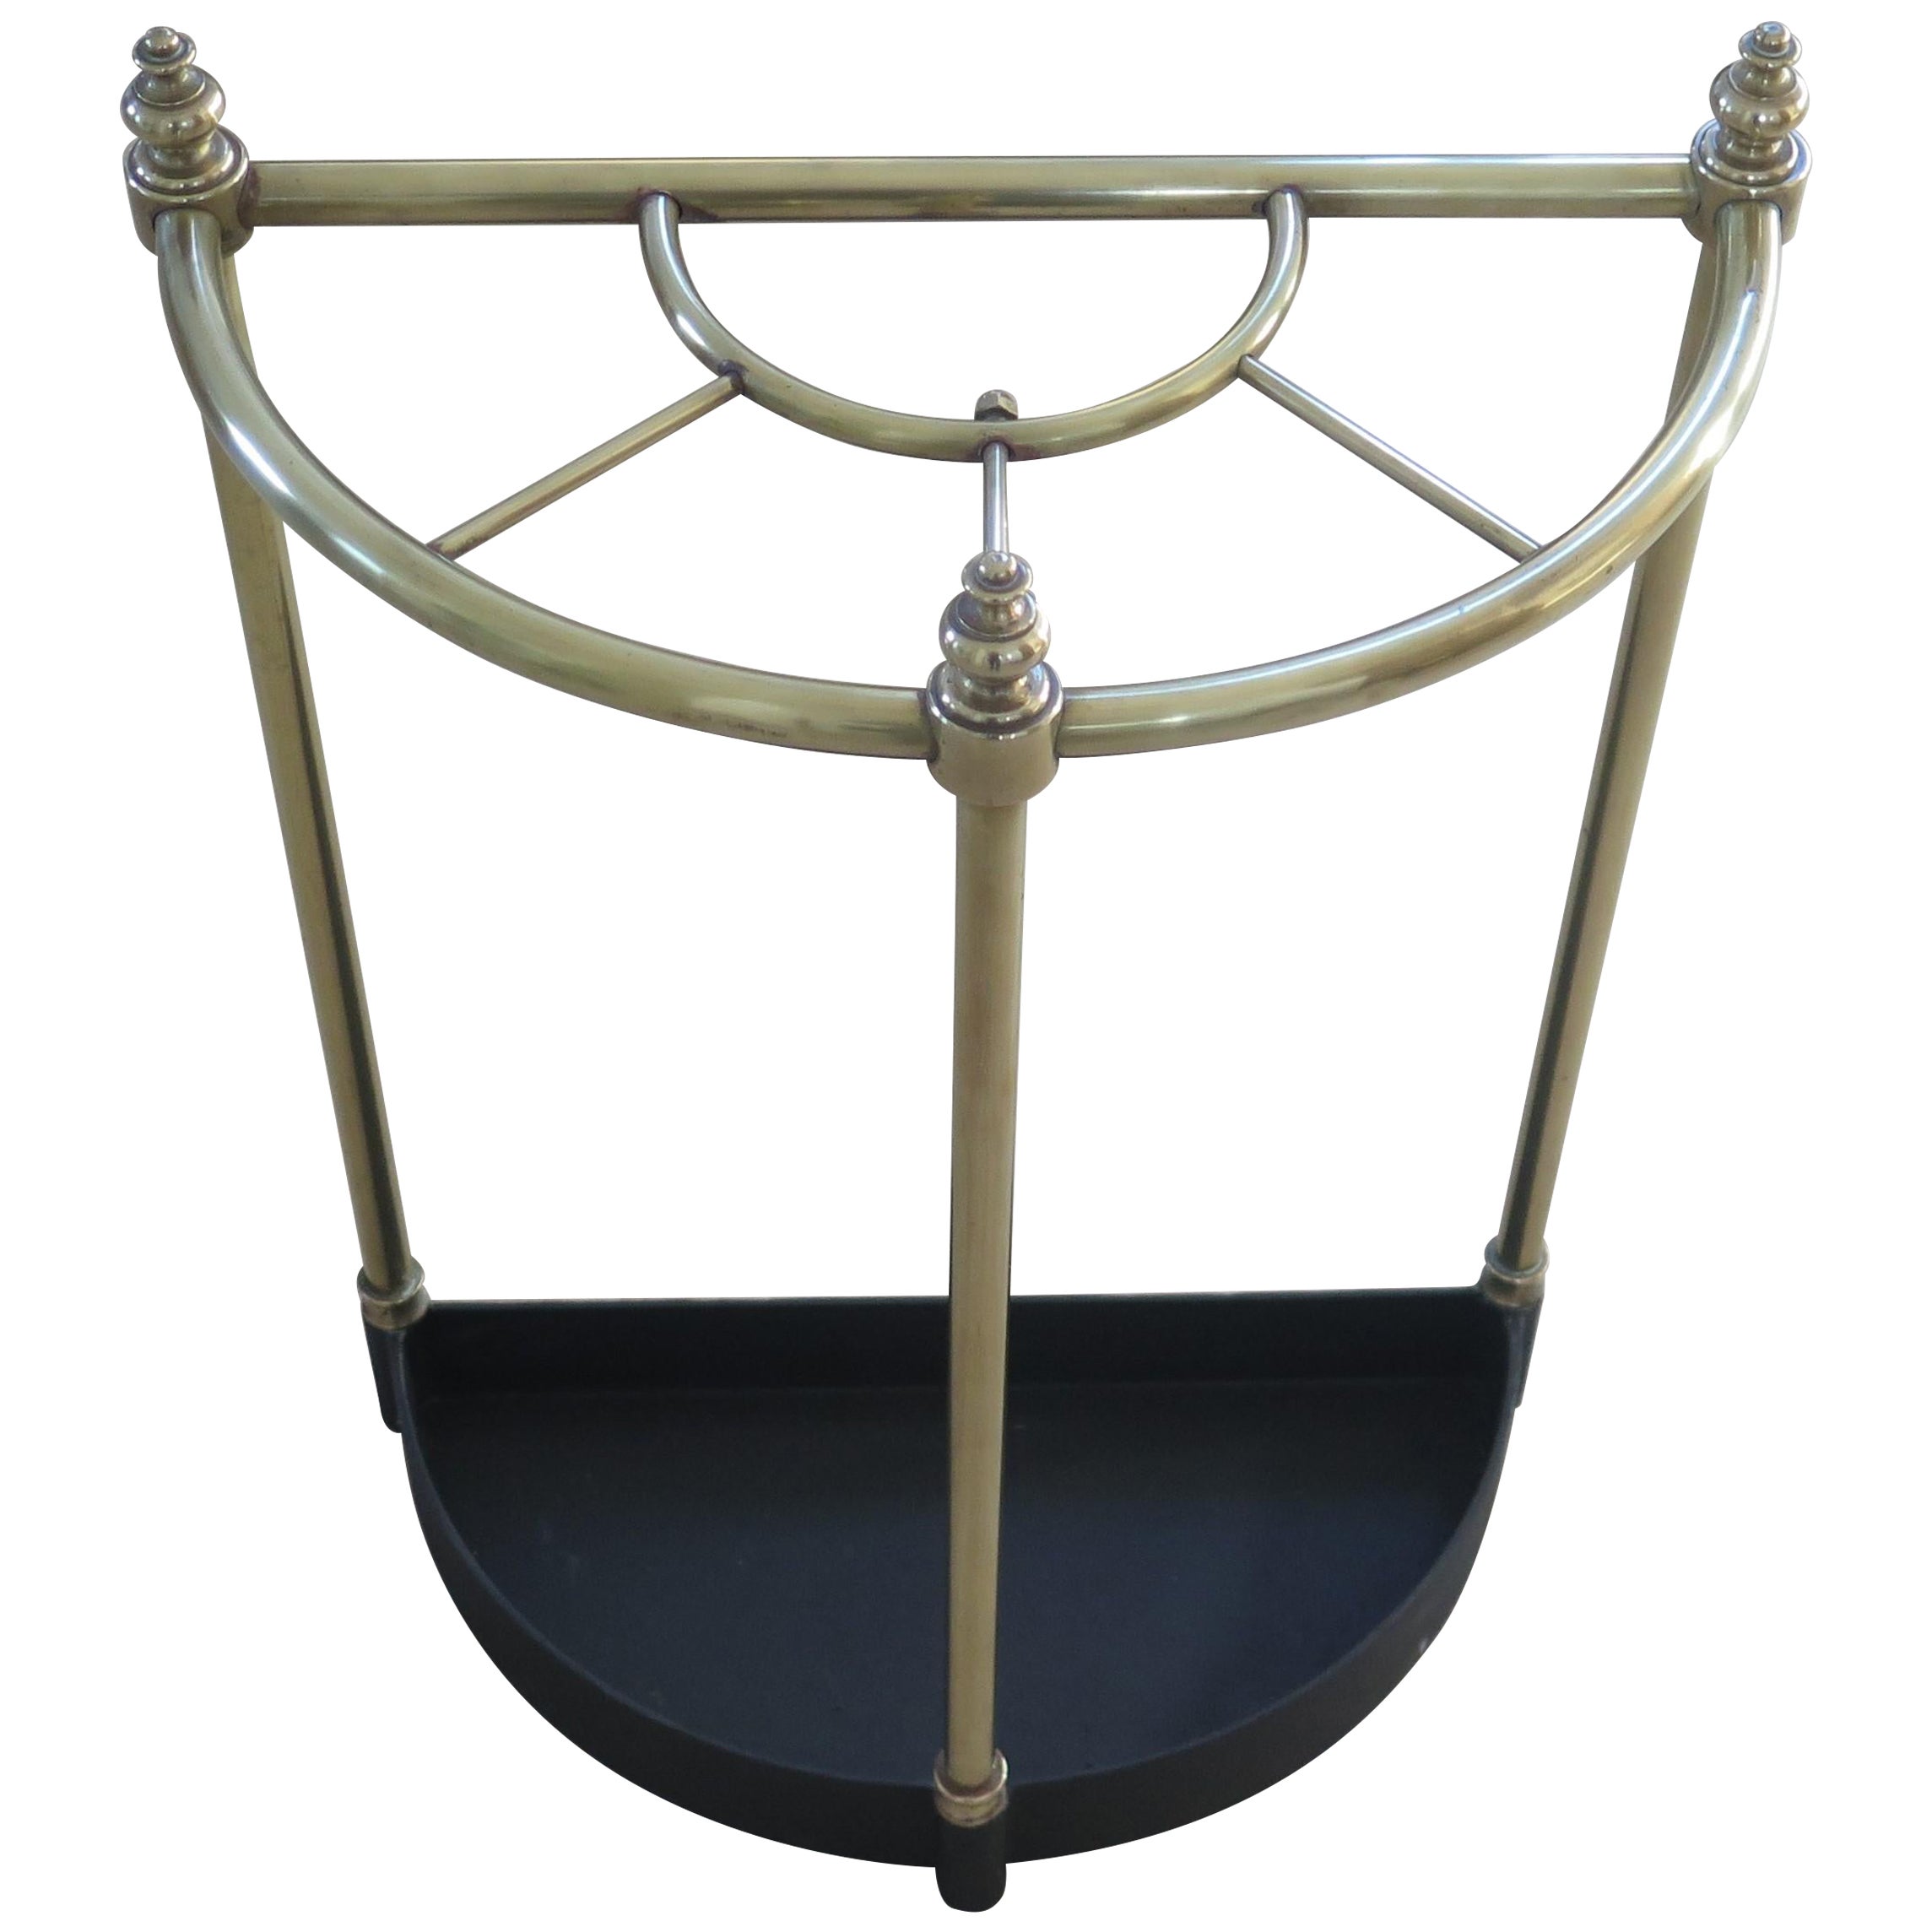 This is a good quality Victorian brass walking stick or umbrella stand, dating to the late 19th Century.

It is a charming piece of a semicircular design, ideal for the hall.

The stand has a brass tubular top divided into 5 sections, supported